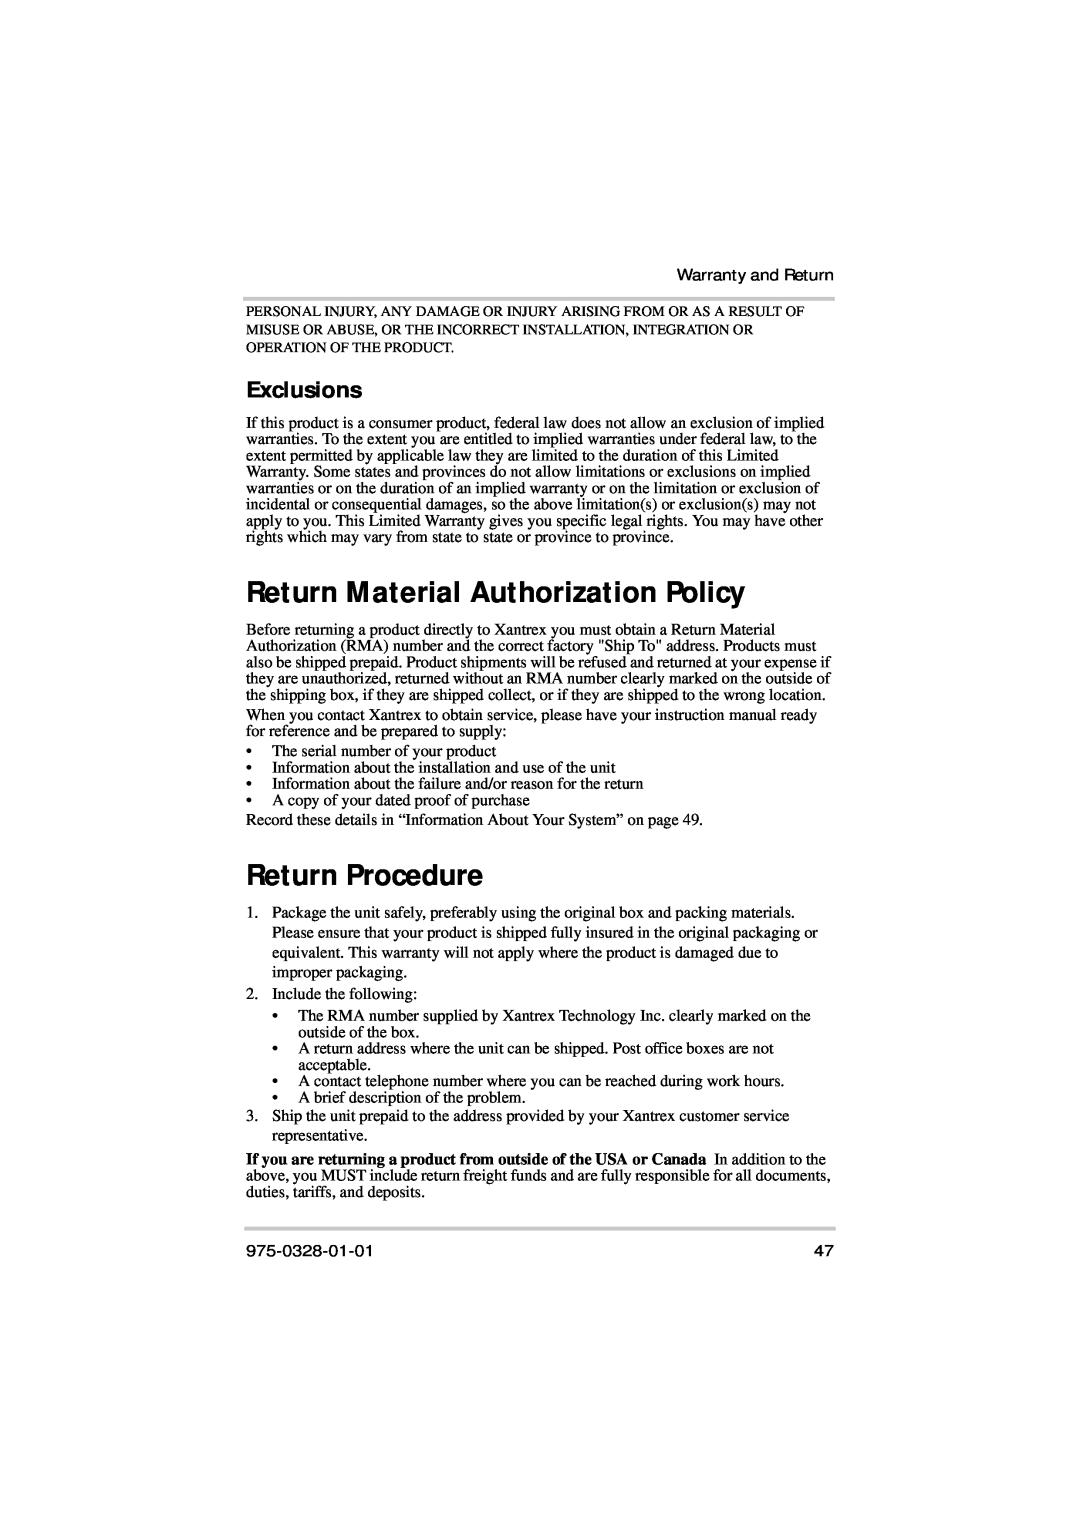 Xantrex Technology Solar 400 manual Return Material Authorization Policy, Return Procedure, Exclusions, Warranty and Return 